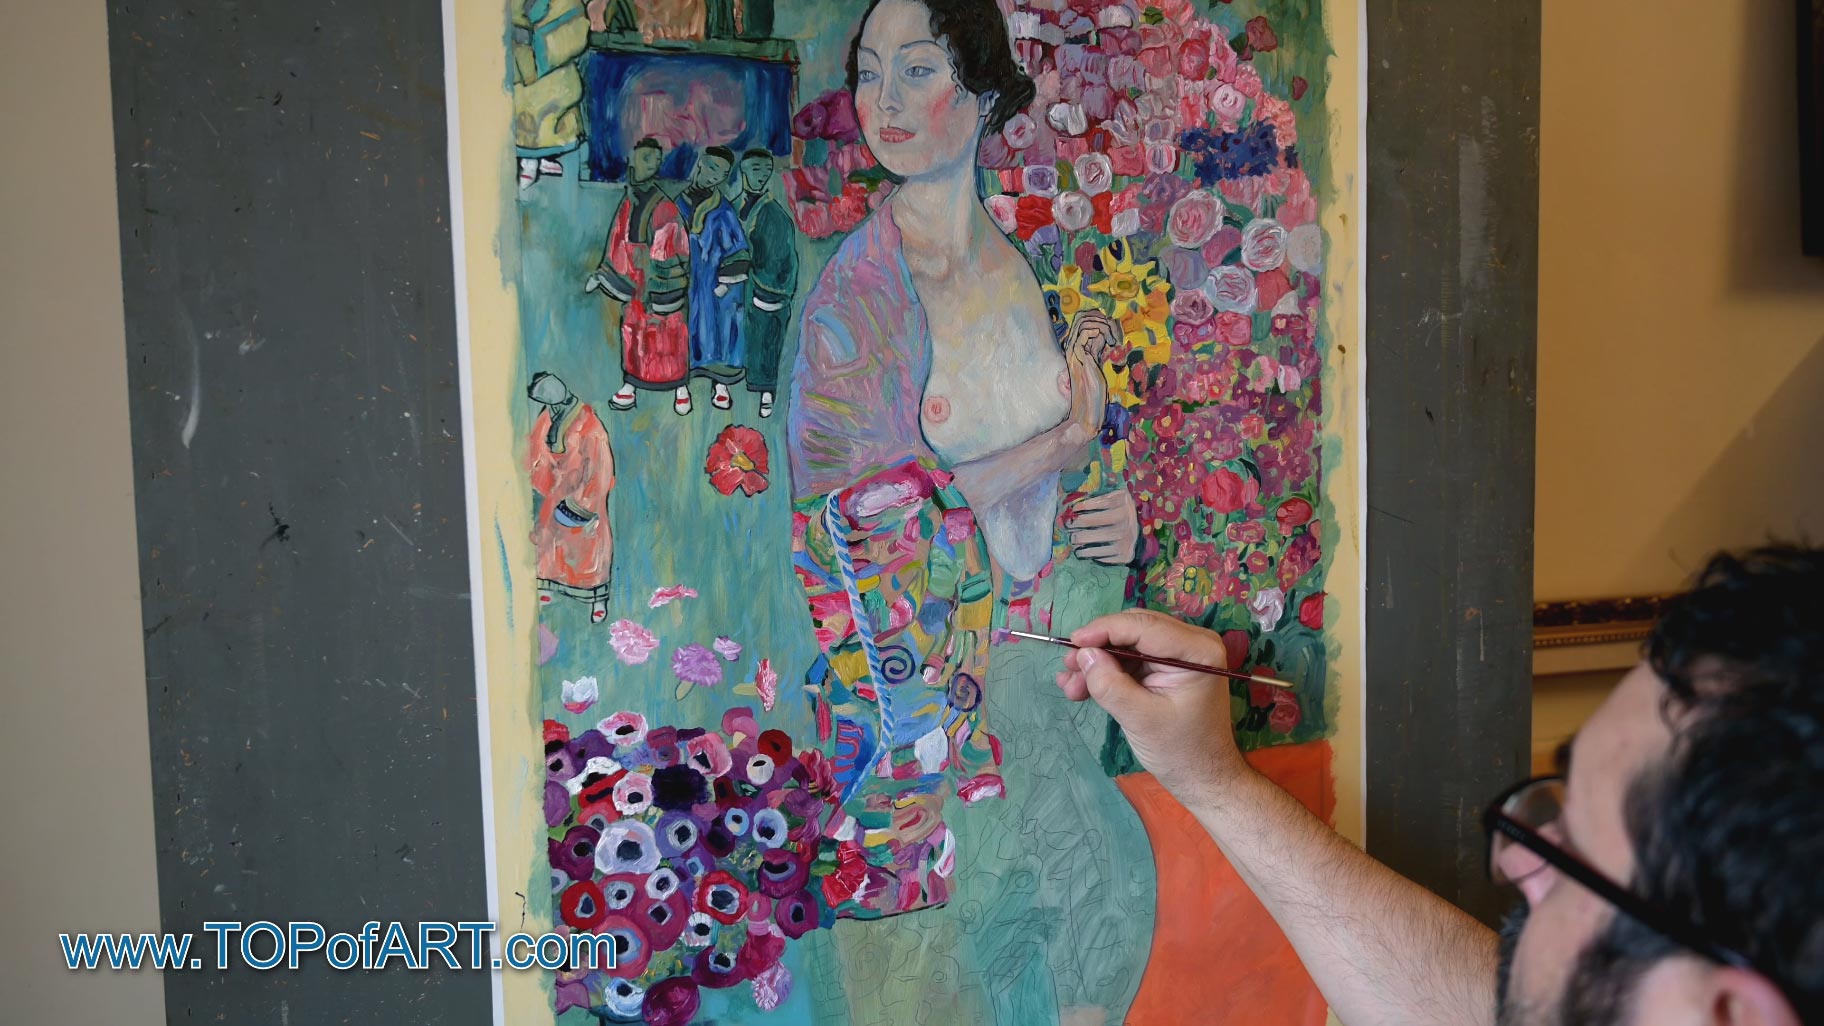 Gustav Klimt - "The Dancer" - Process of Creation of the Painting